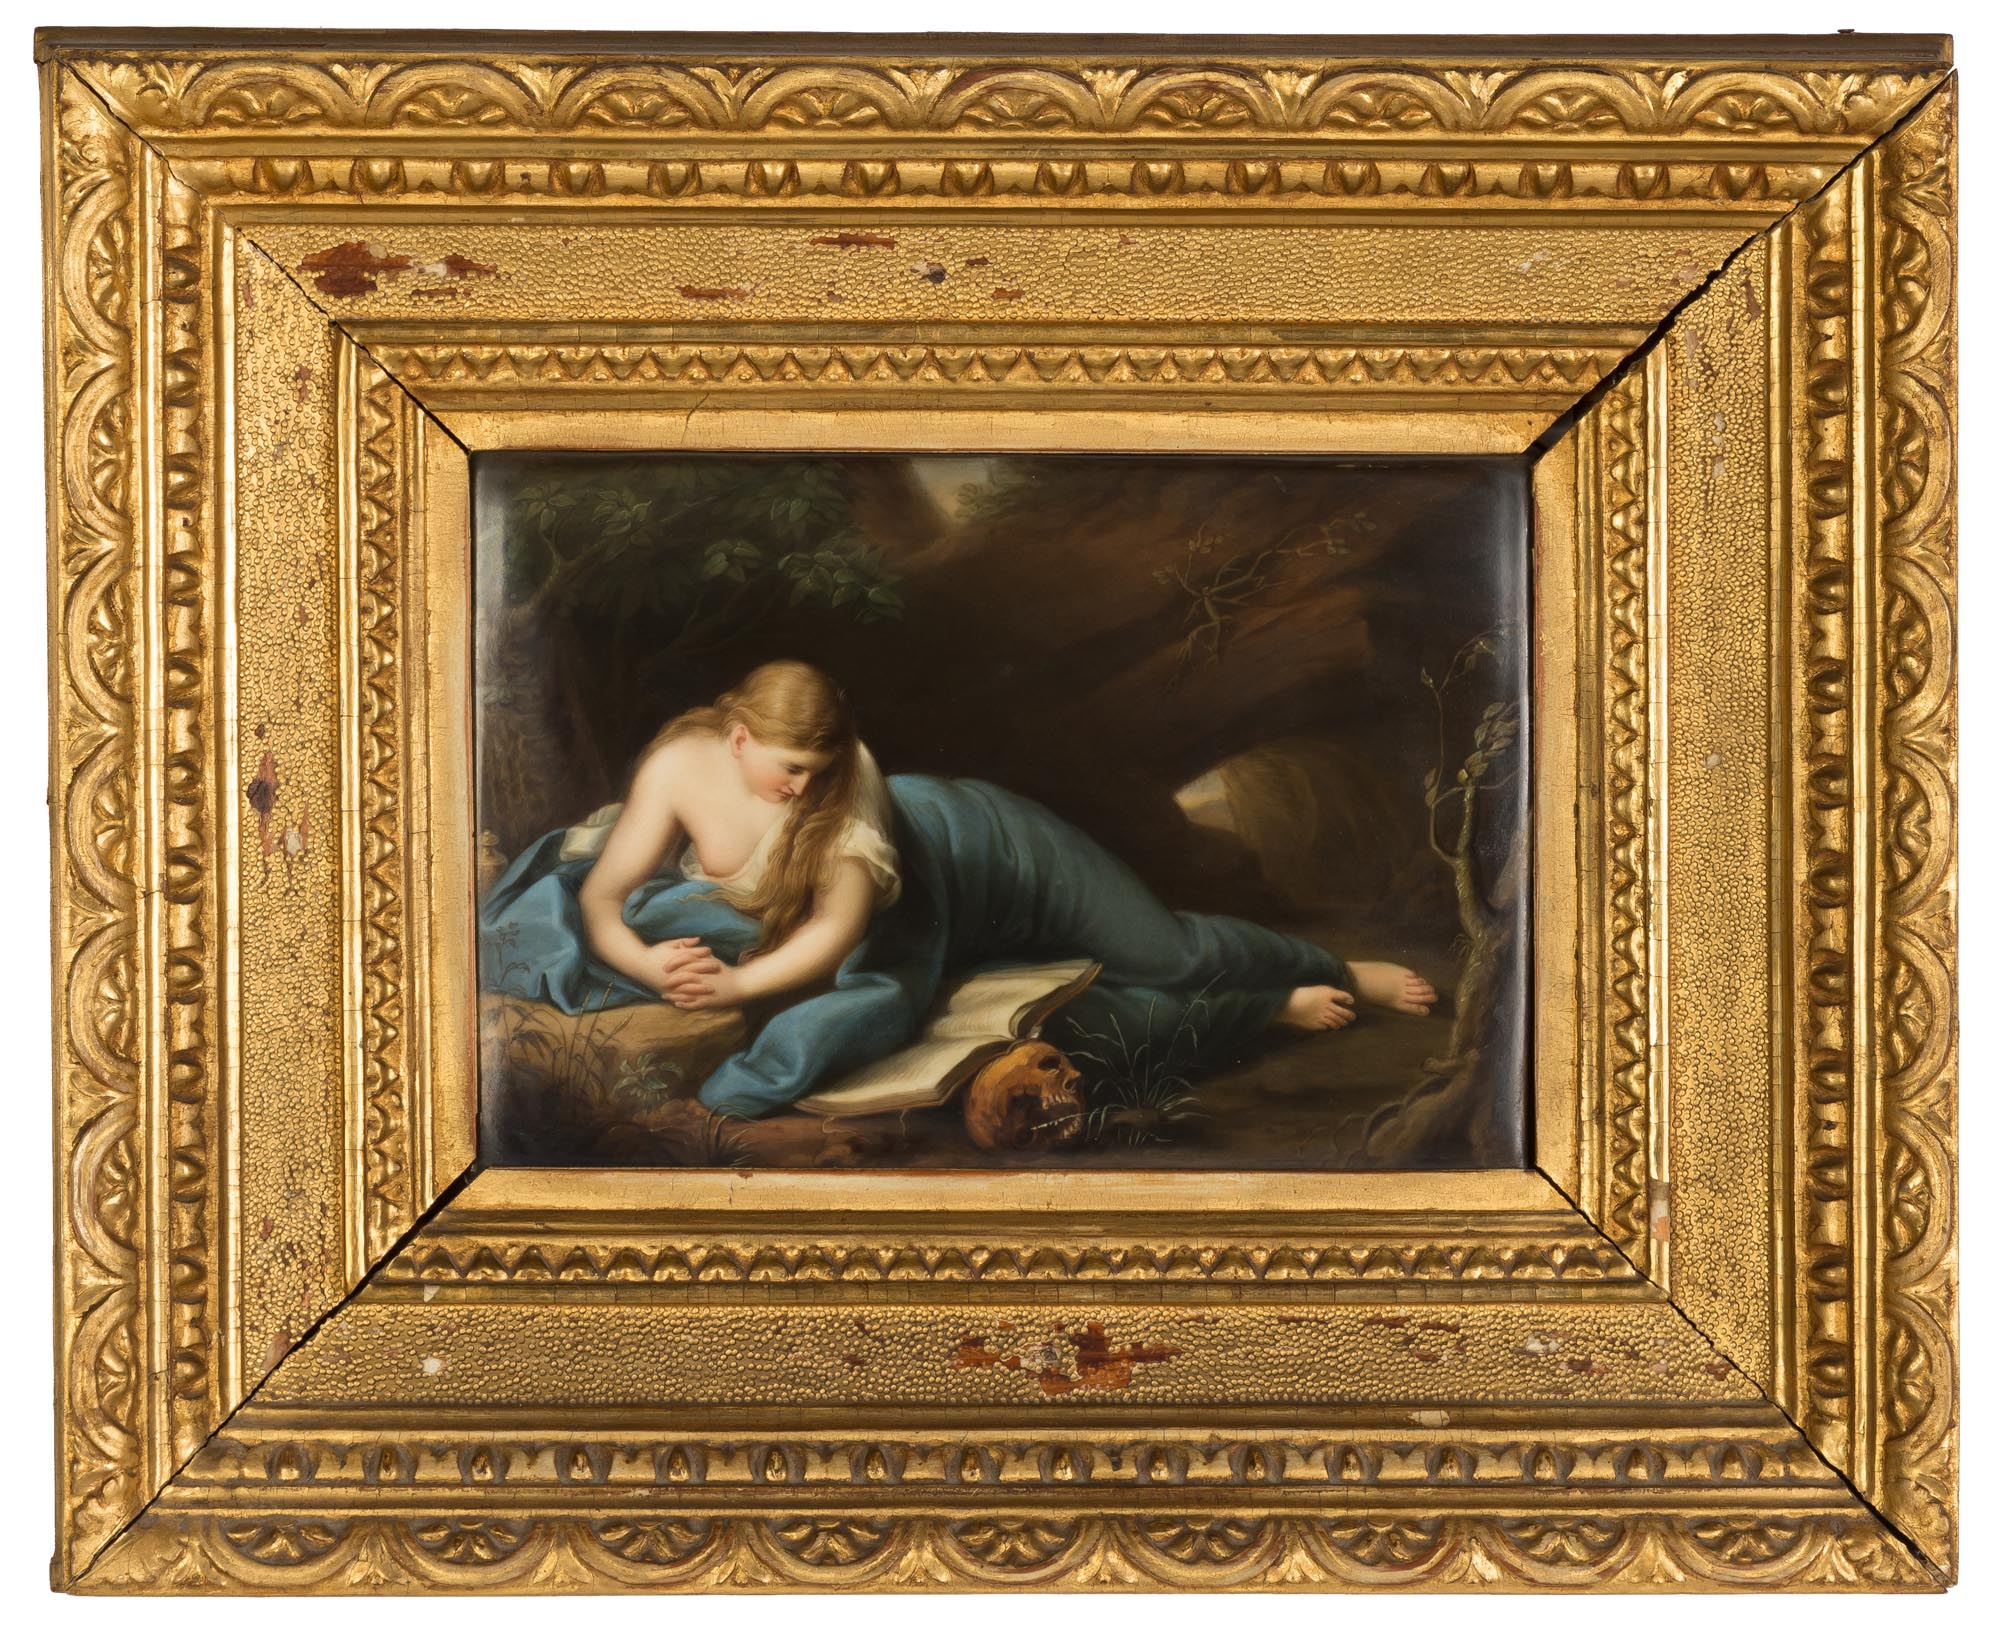 KPM Plaque of Mary Magdalene. 19th century. Stamped KPM (on reverse). Hand painted with period